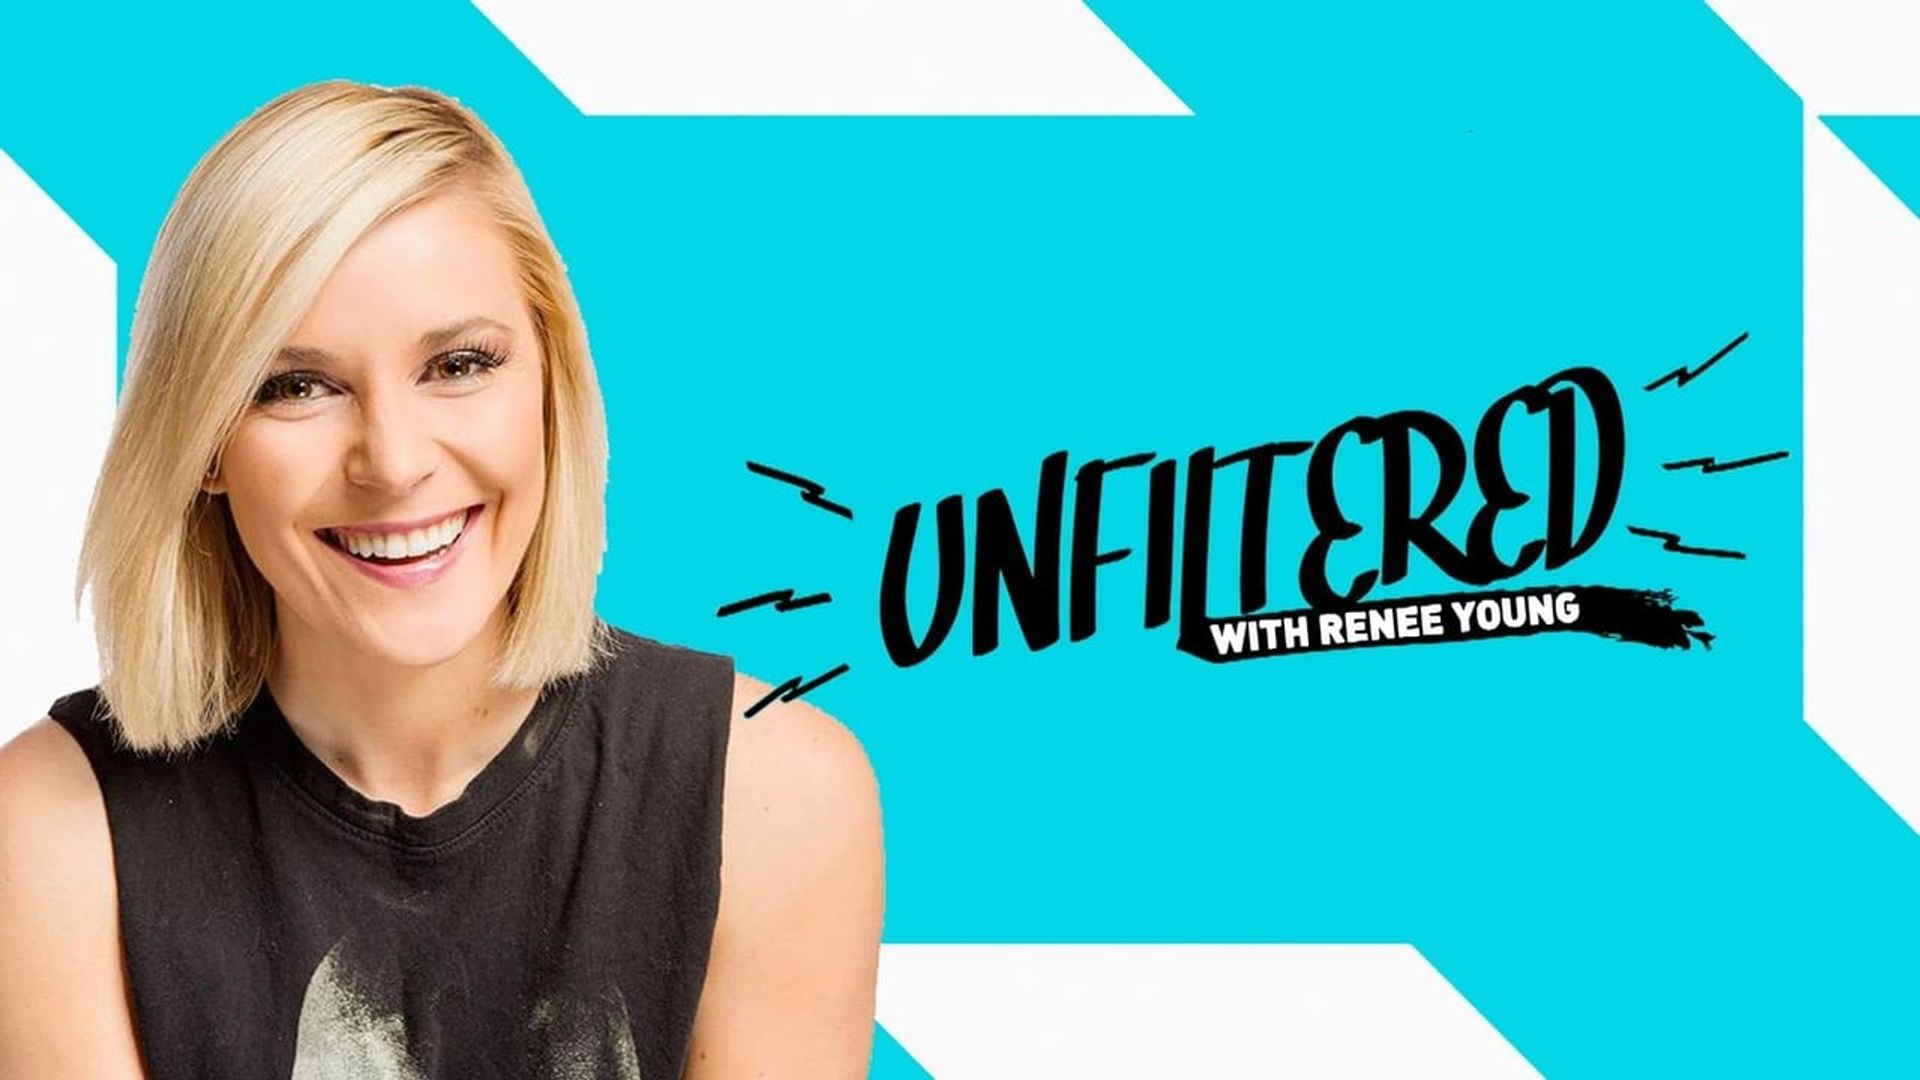 Unfiltered with Renee Young background